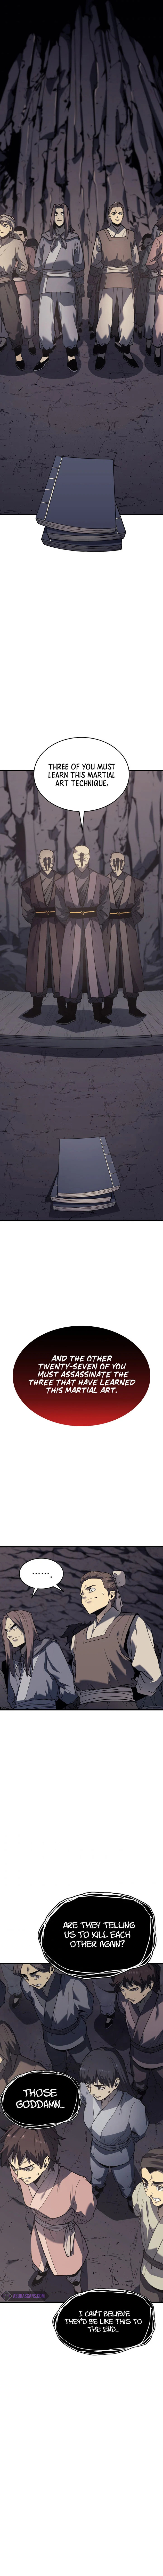 Reaper of the Drifting Moon - Chapter 11 Page 6